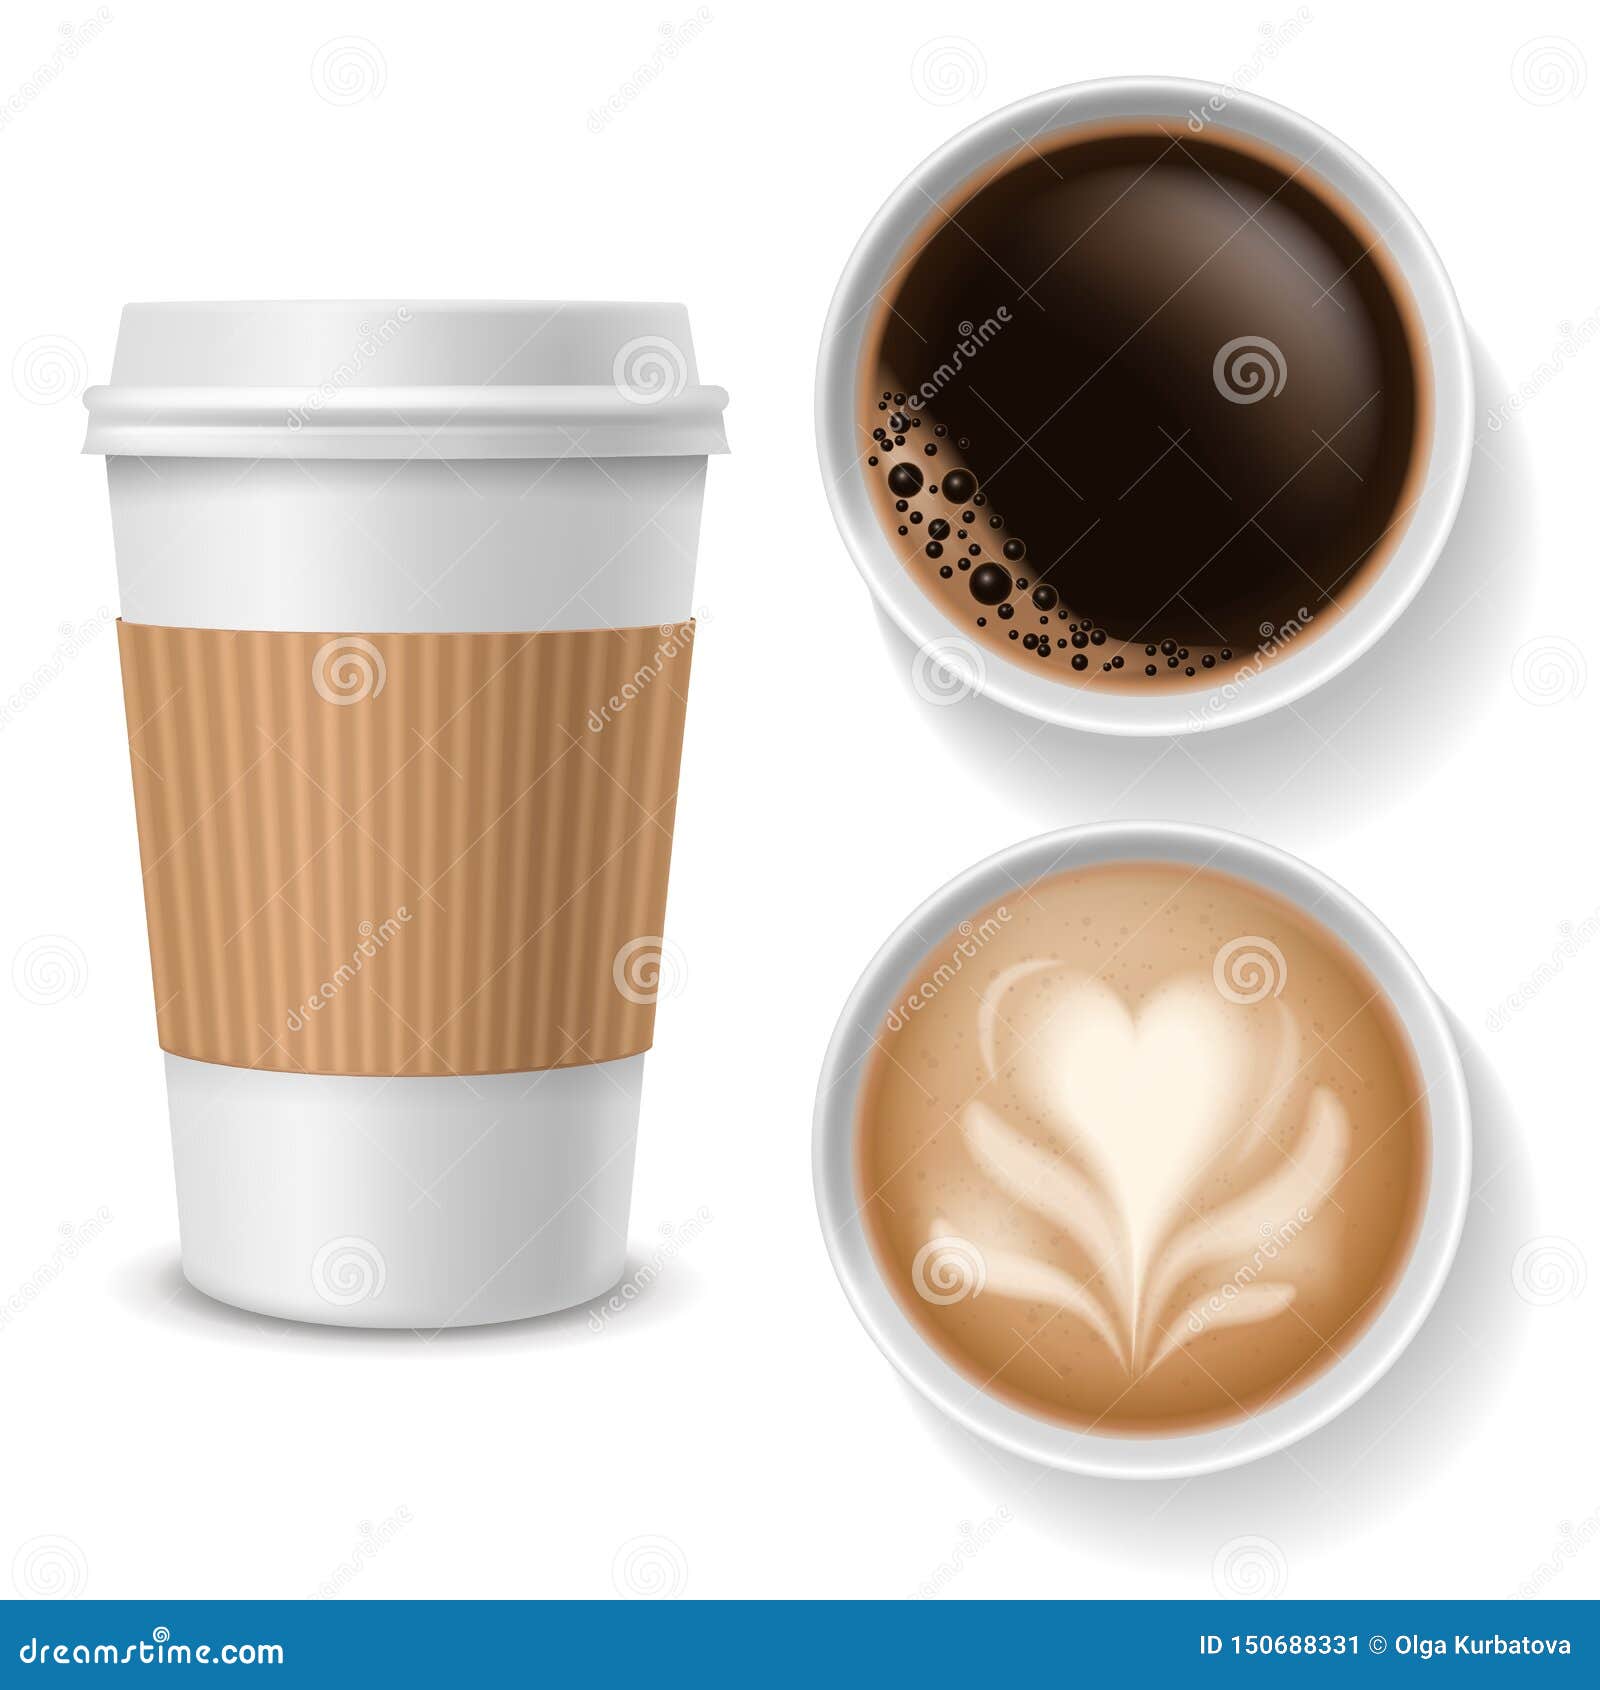 takeaway coffee cups. top view beverages in paper white, brown coffee cup with cappuccino americano espresso latte